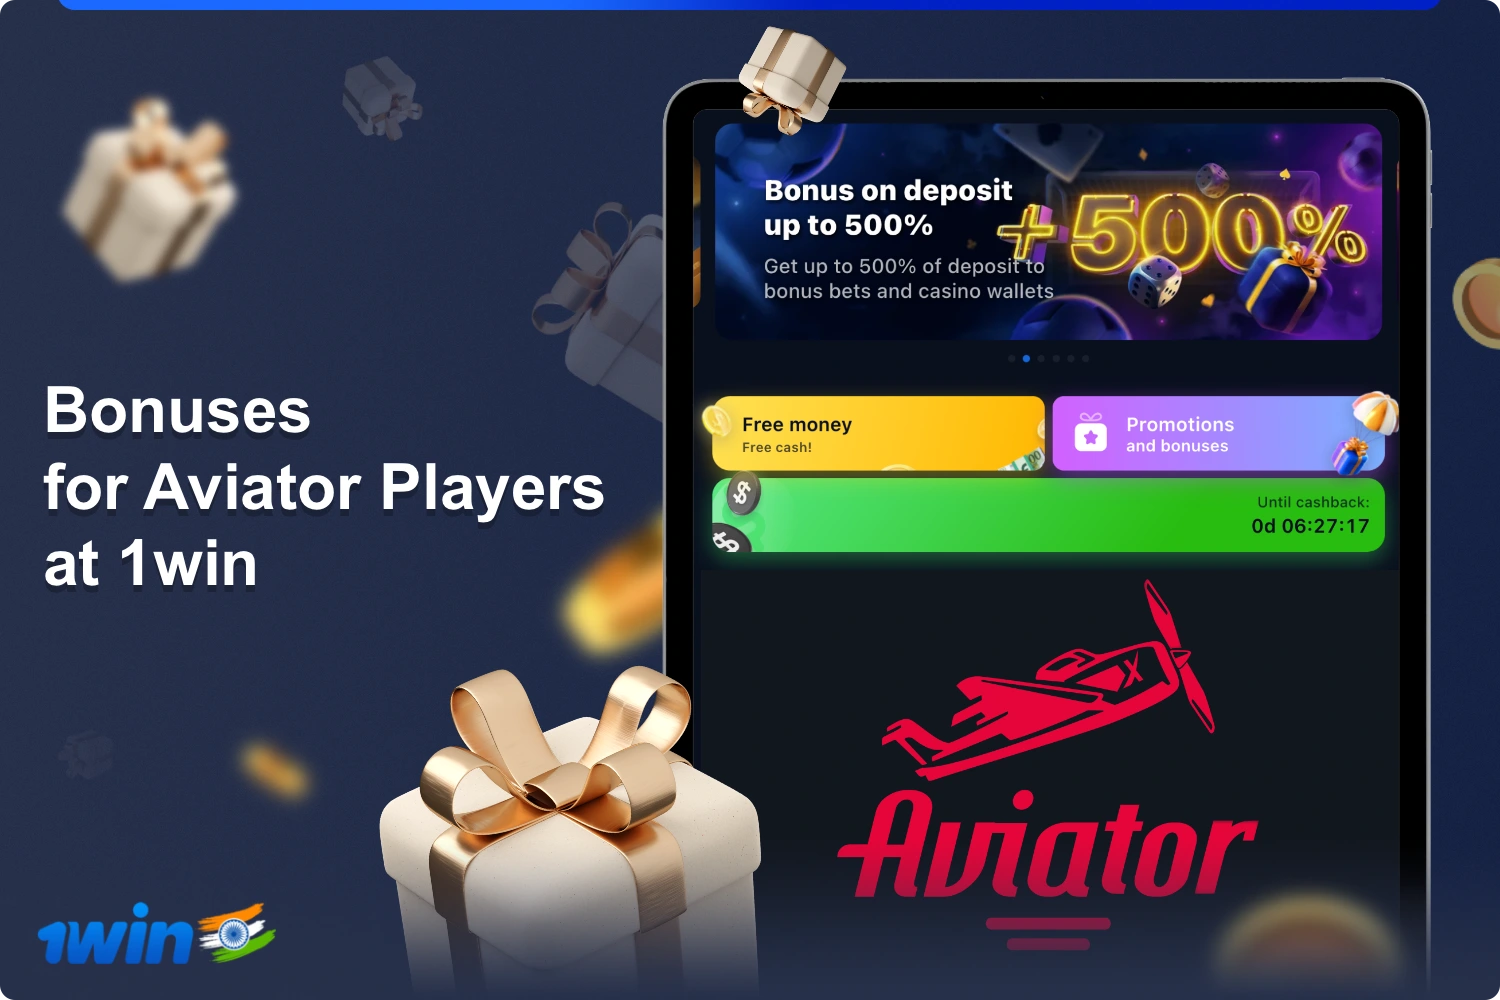 1win users from India have access to a variety of bonuses for the online game Aviator